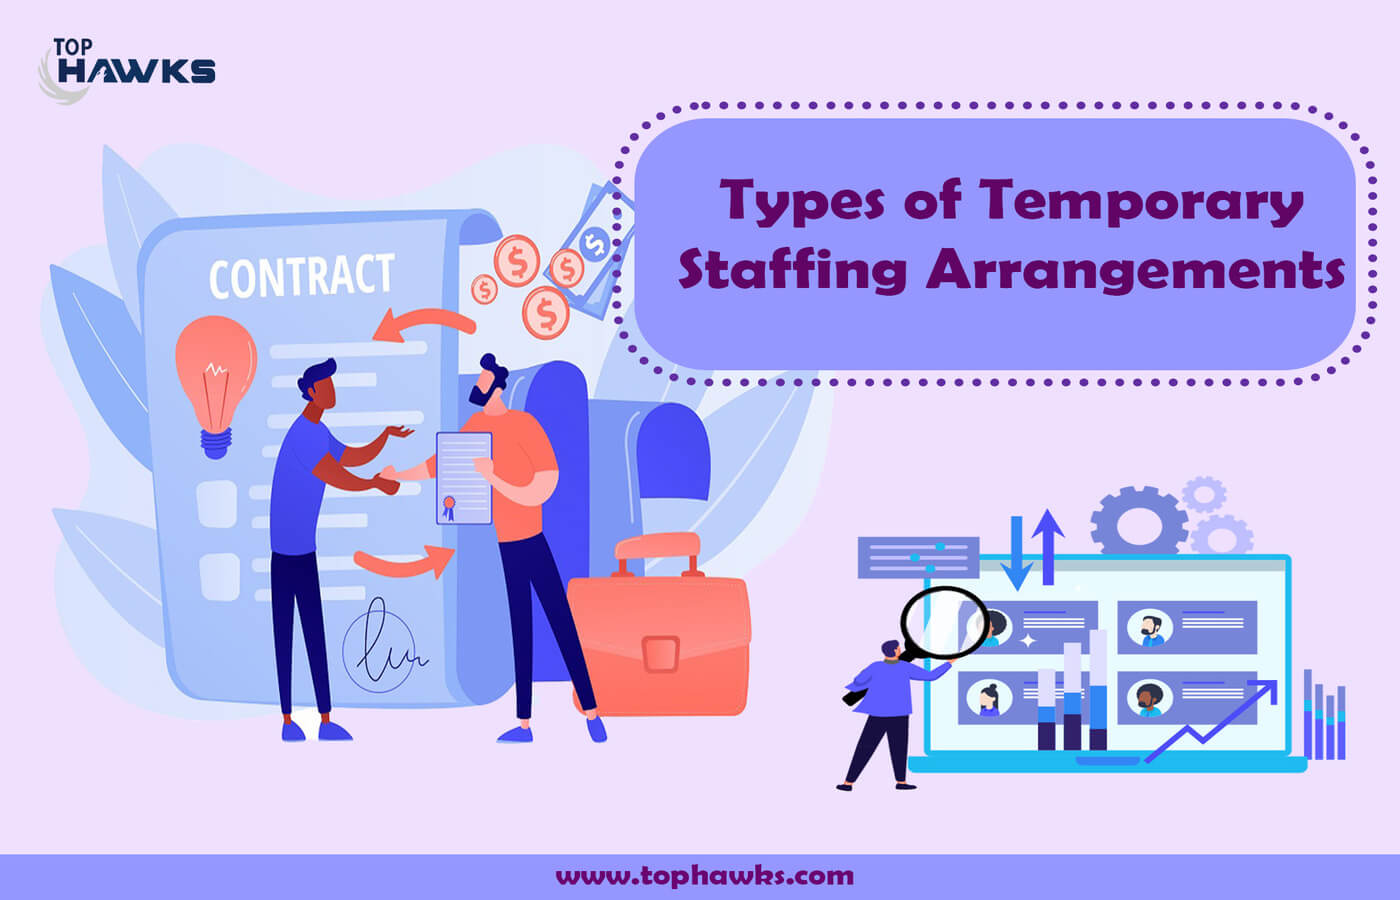 Image depicting Types of Temporary Staffing Arrangements